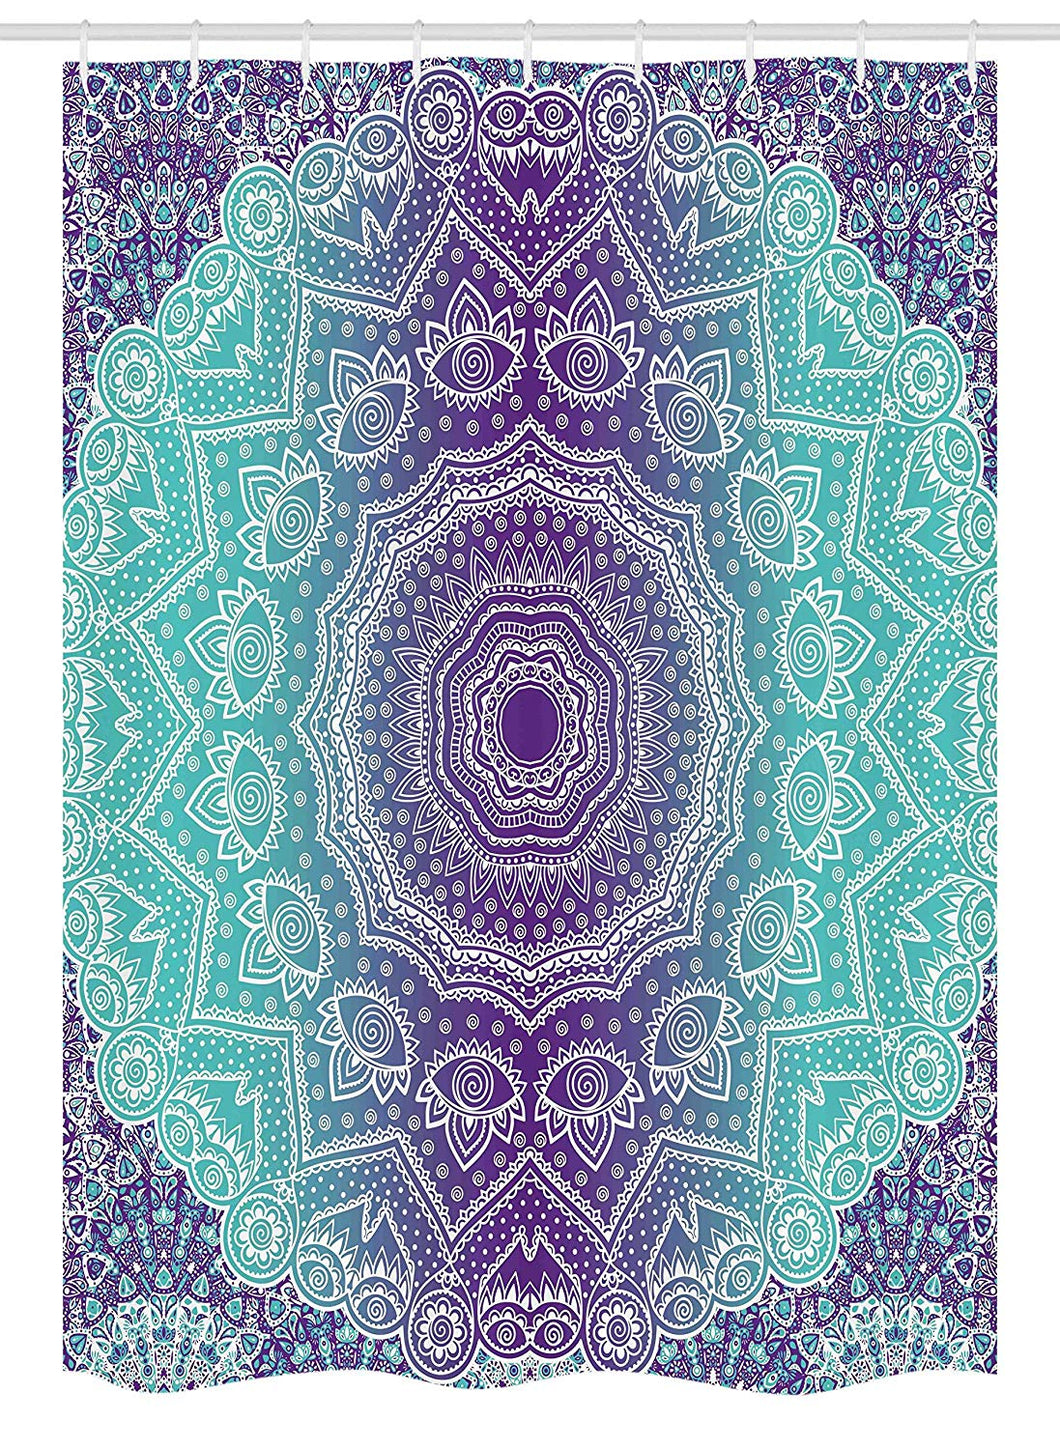 Ambesonne Purple and Turquoise Stall Shower Curtain, Hippie Ombre Mandala Inner Peace and Meditation with Ornamental Art, Fabric Bathroom Decor Set with Hooks, 54 W x 78 L Inches, Purple Aqua